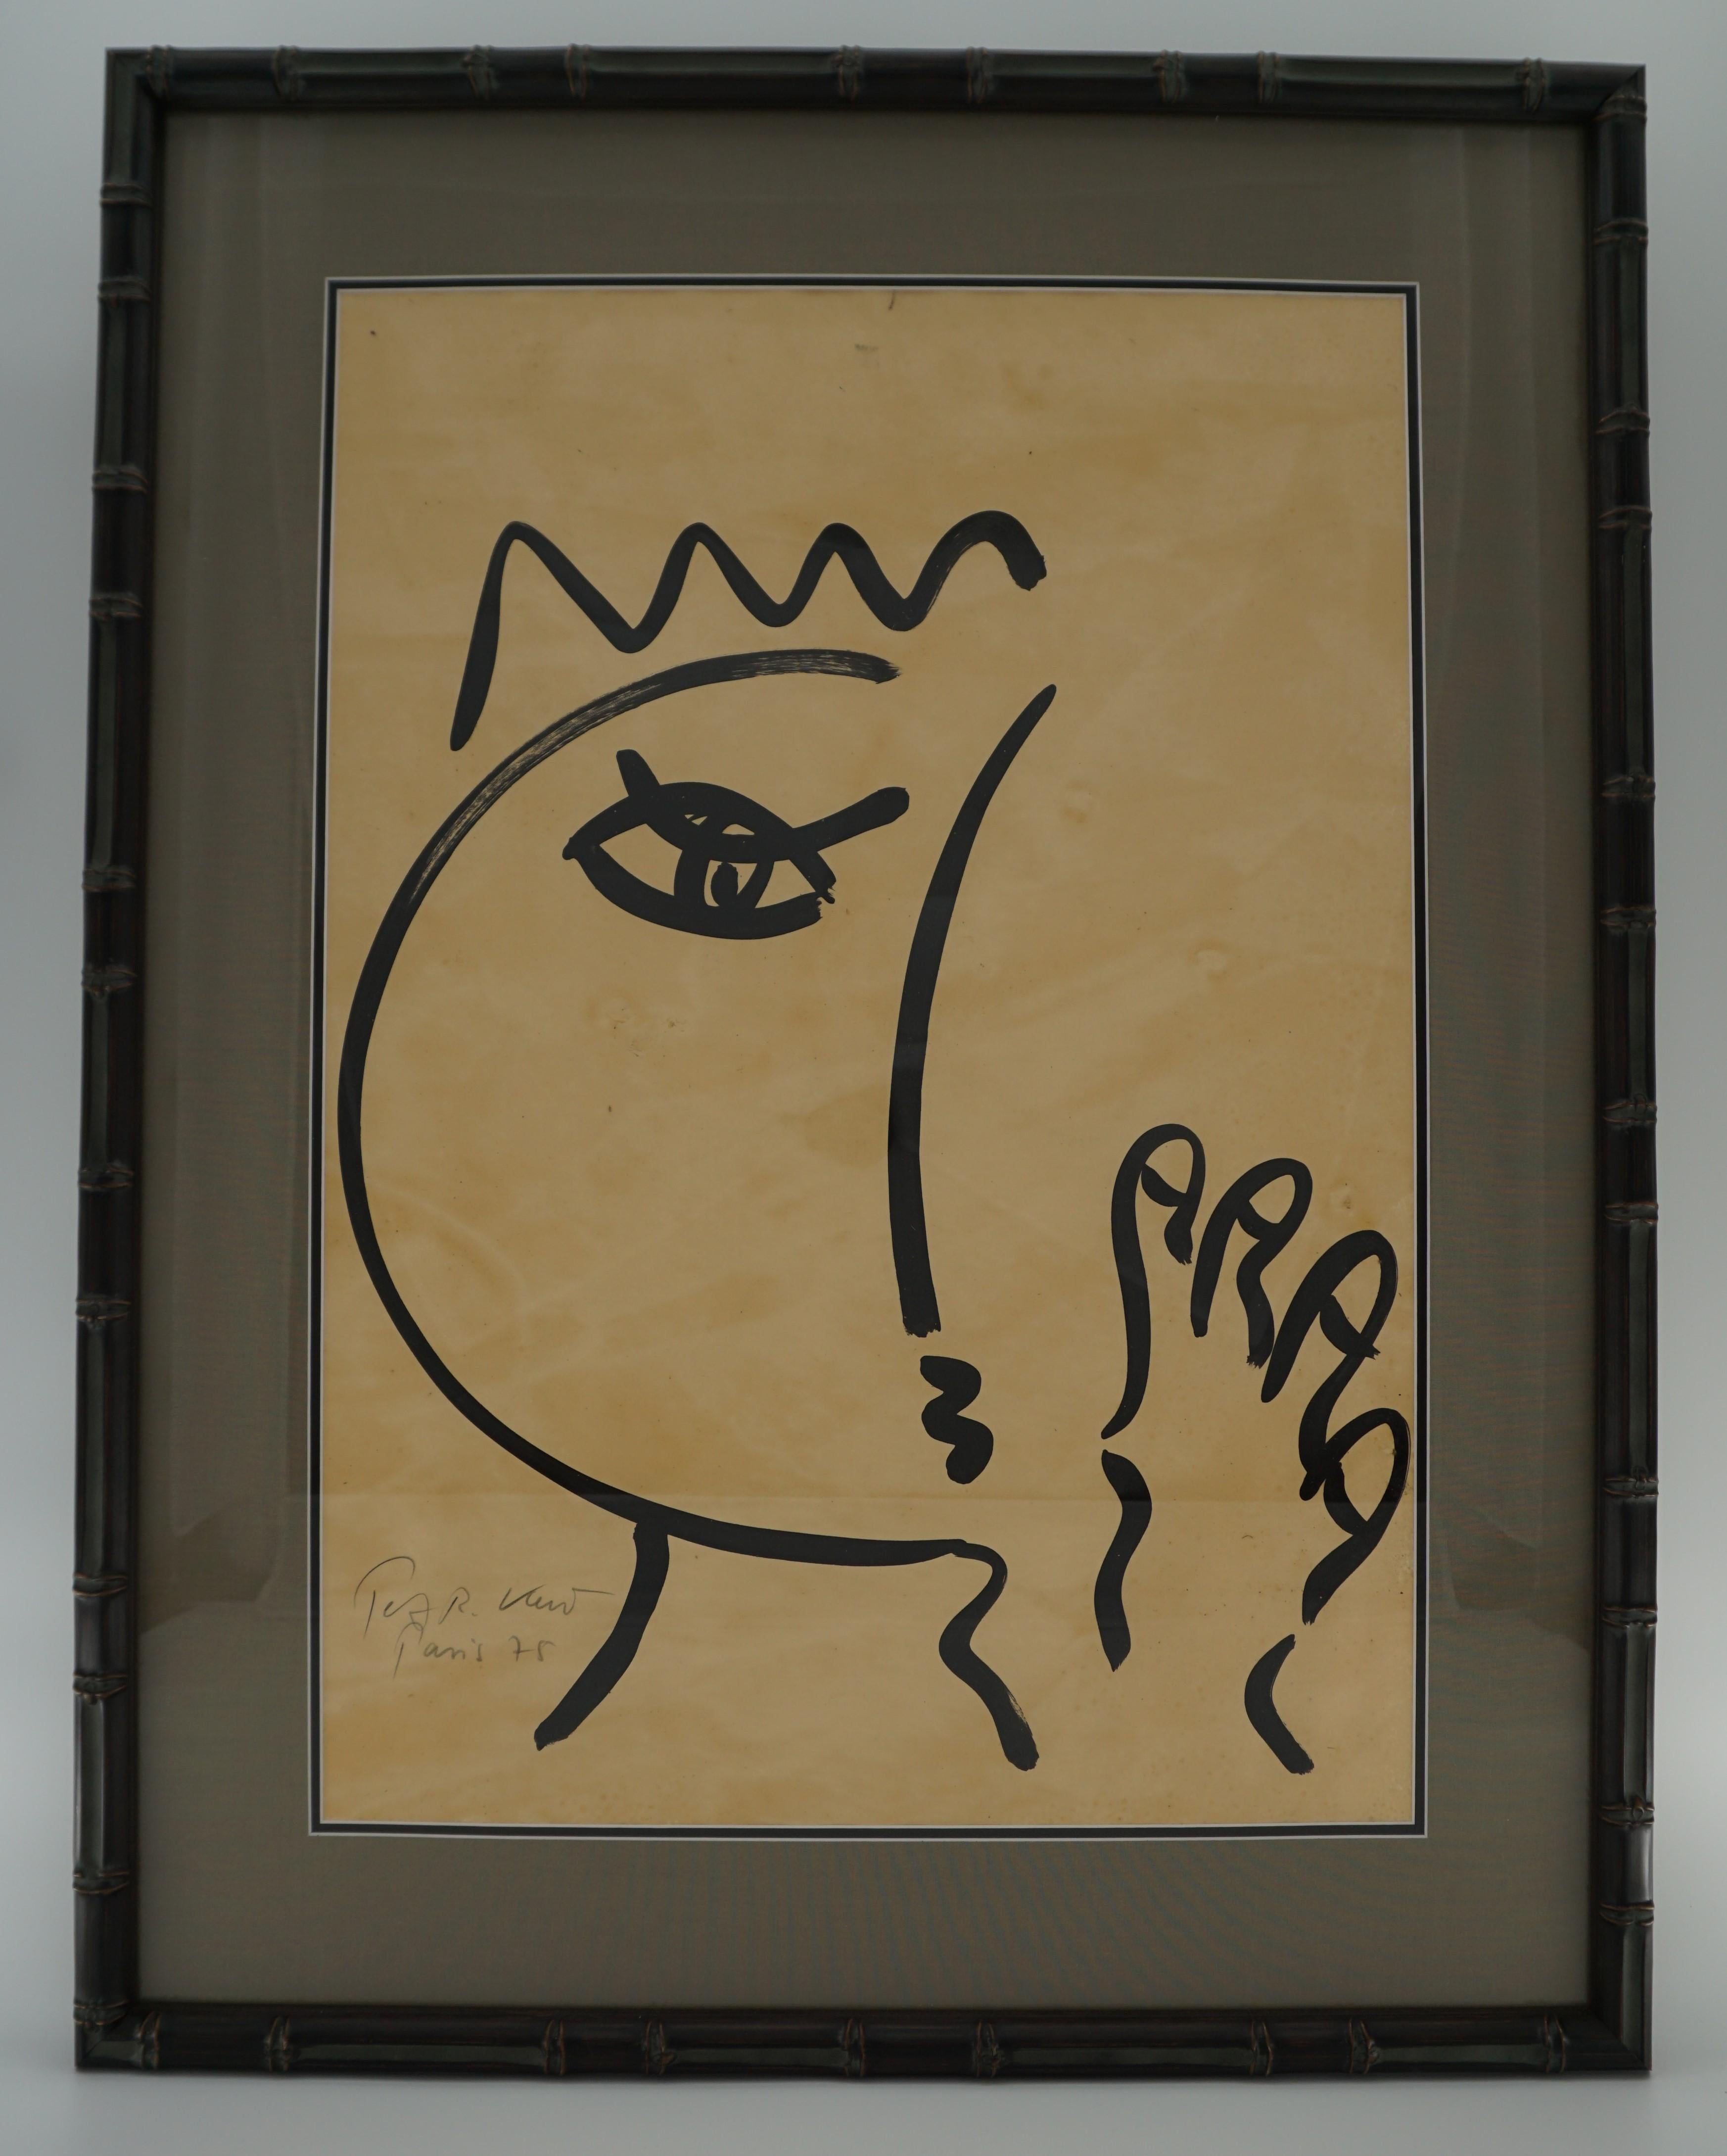 Painting by Peter Keil, C 1975, New Frame with Linen Matting, Signed, on Paper 5